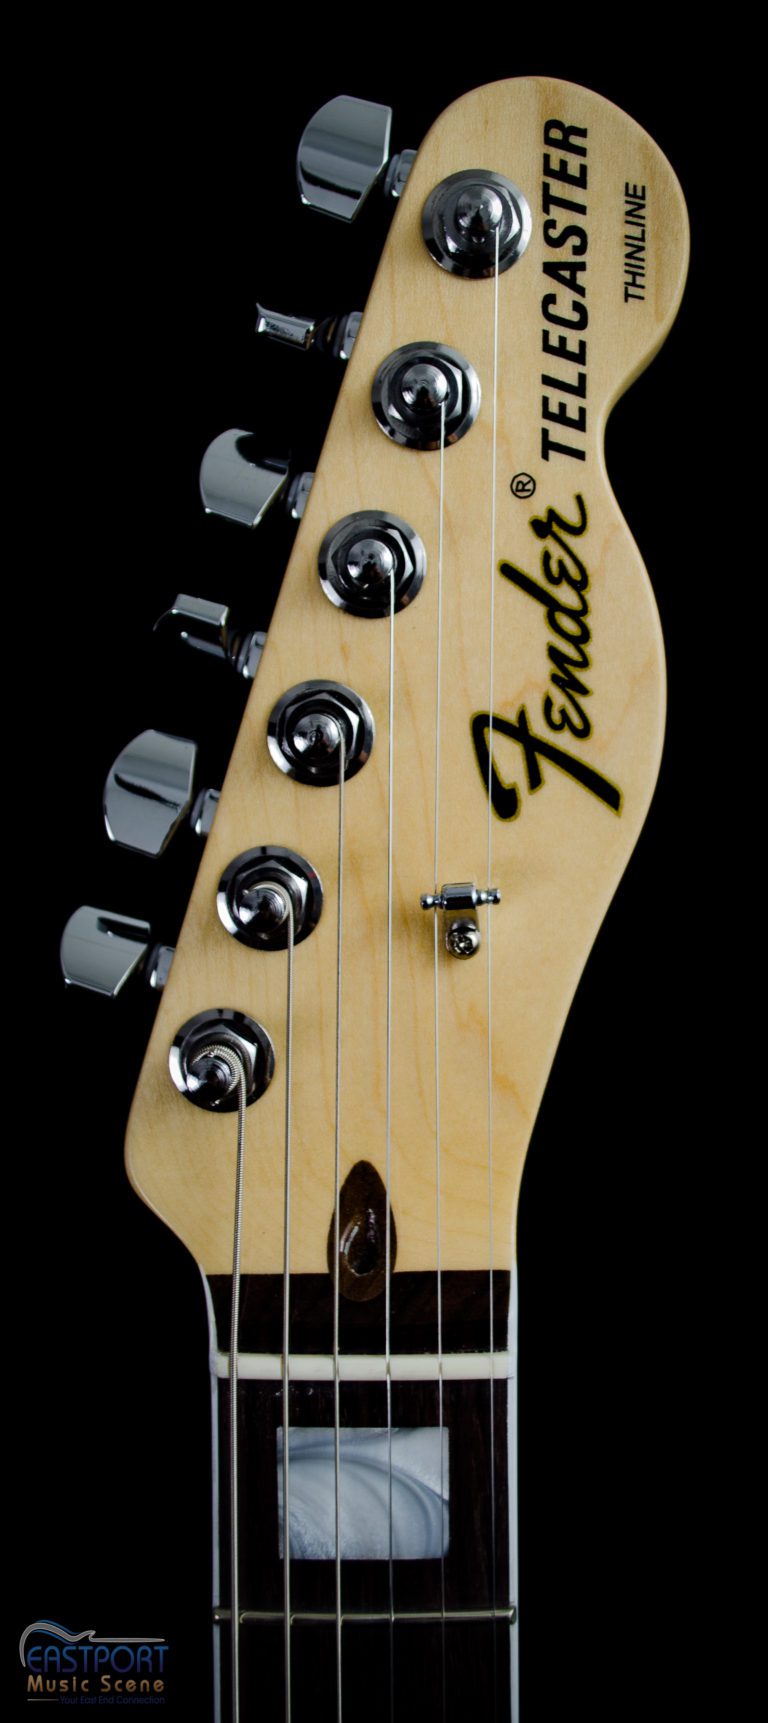 A close up of the headstock on an electric guitar.